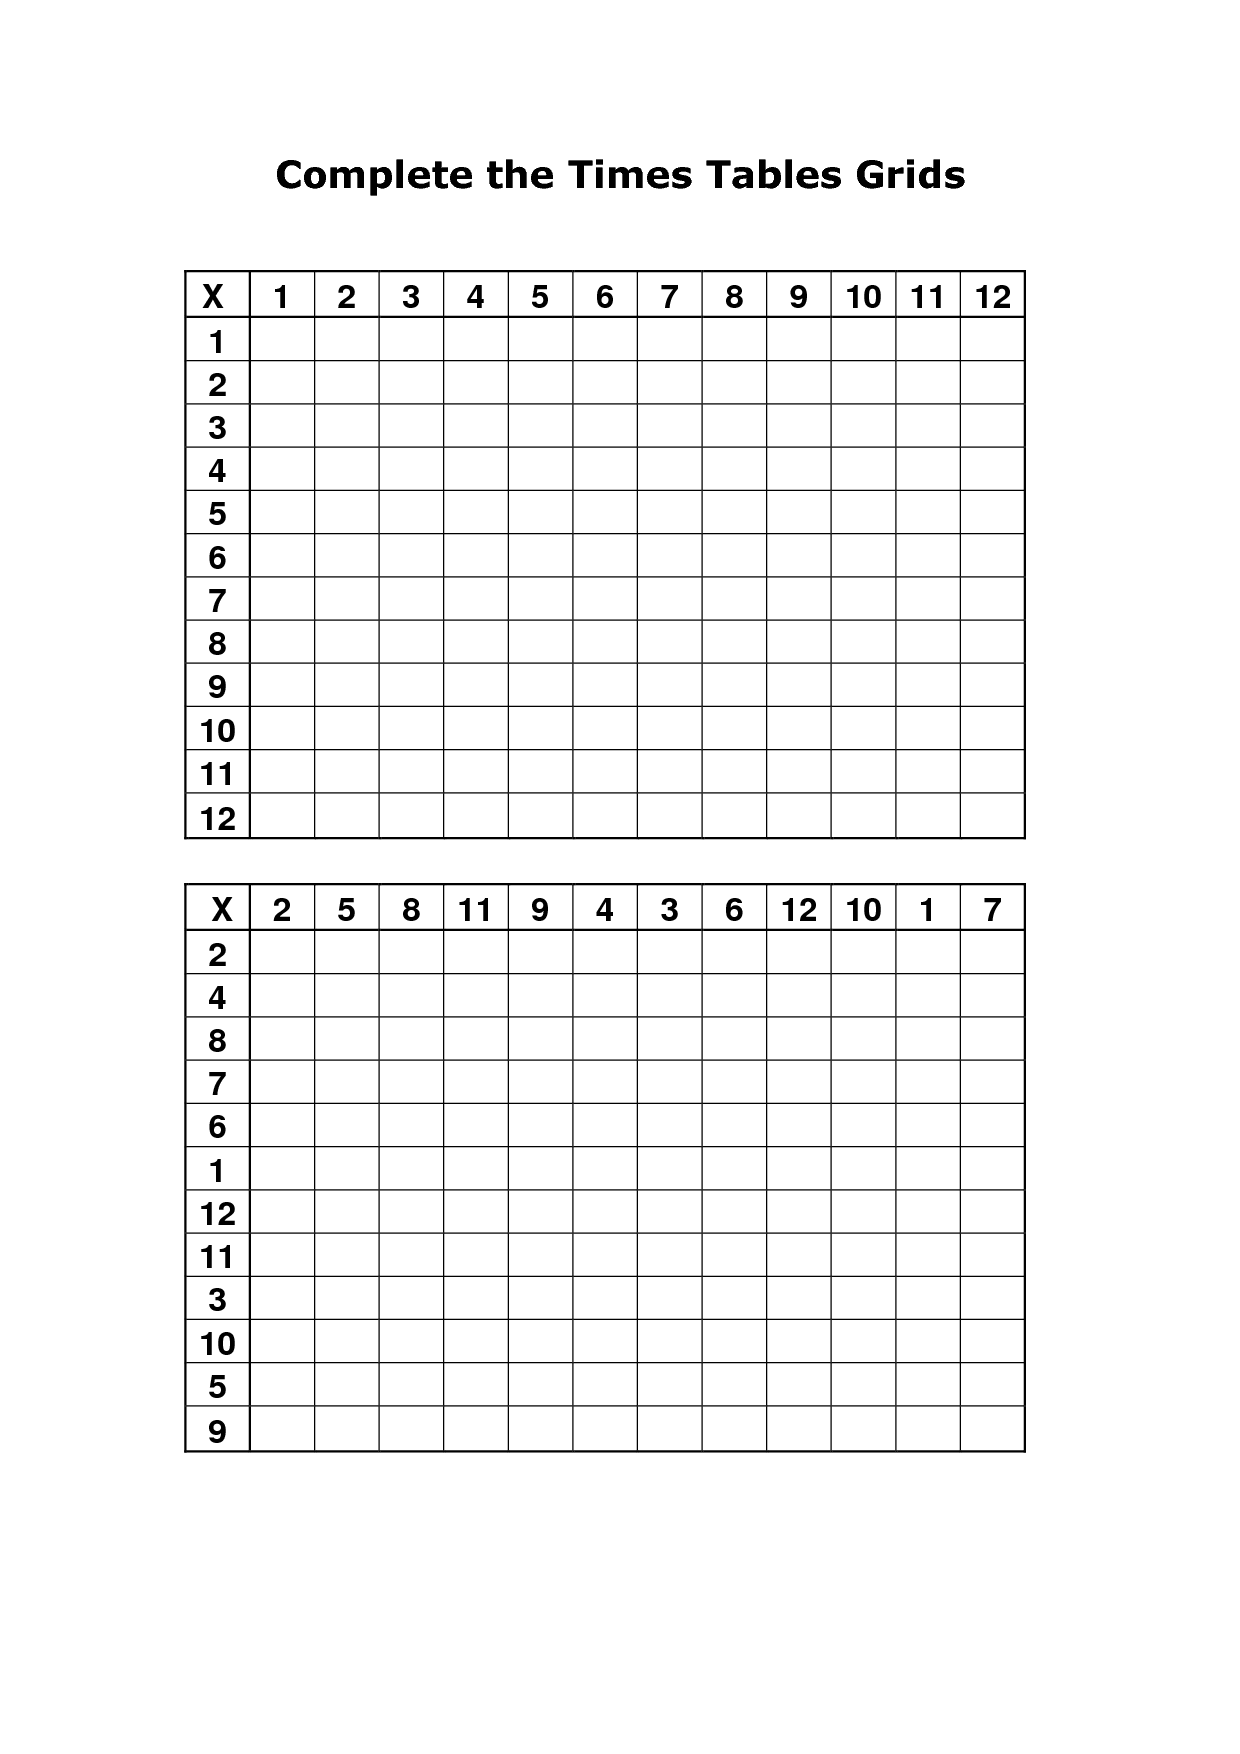 Blank Times Table Grid Printable Free - Printable Templates by Nora